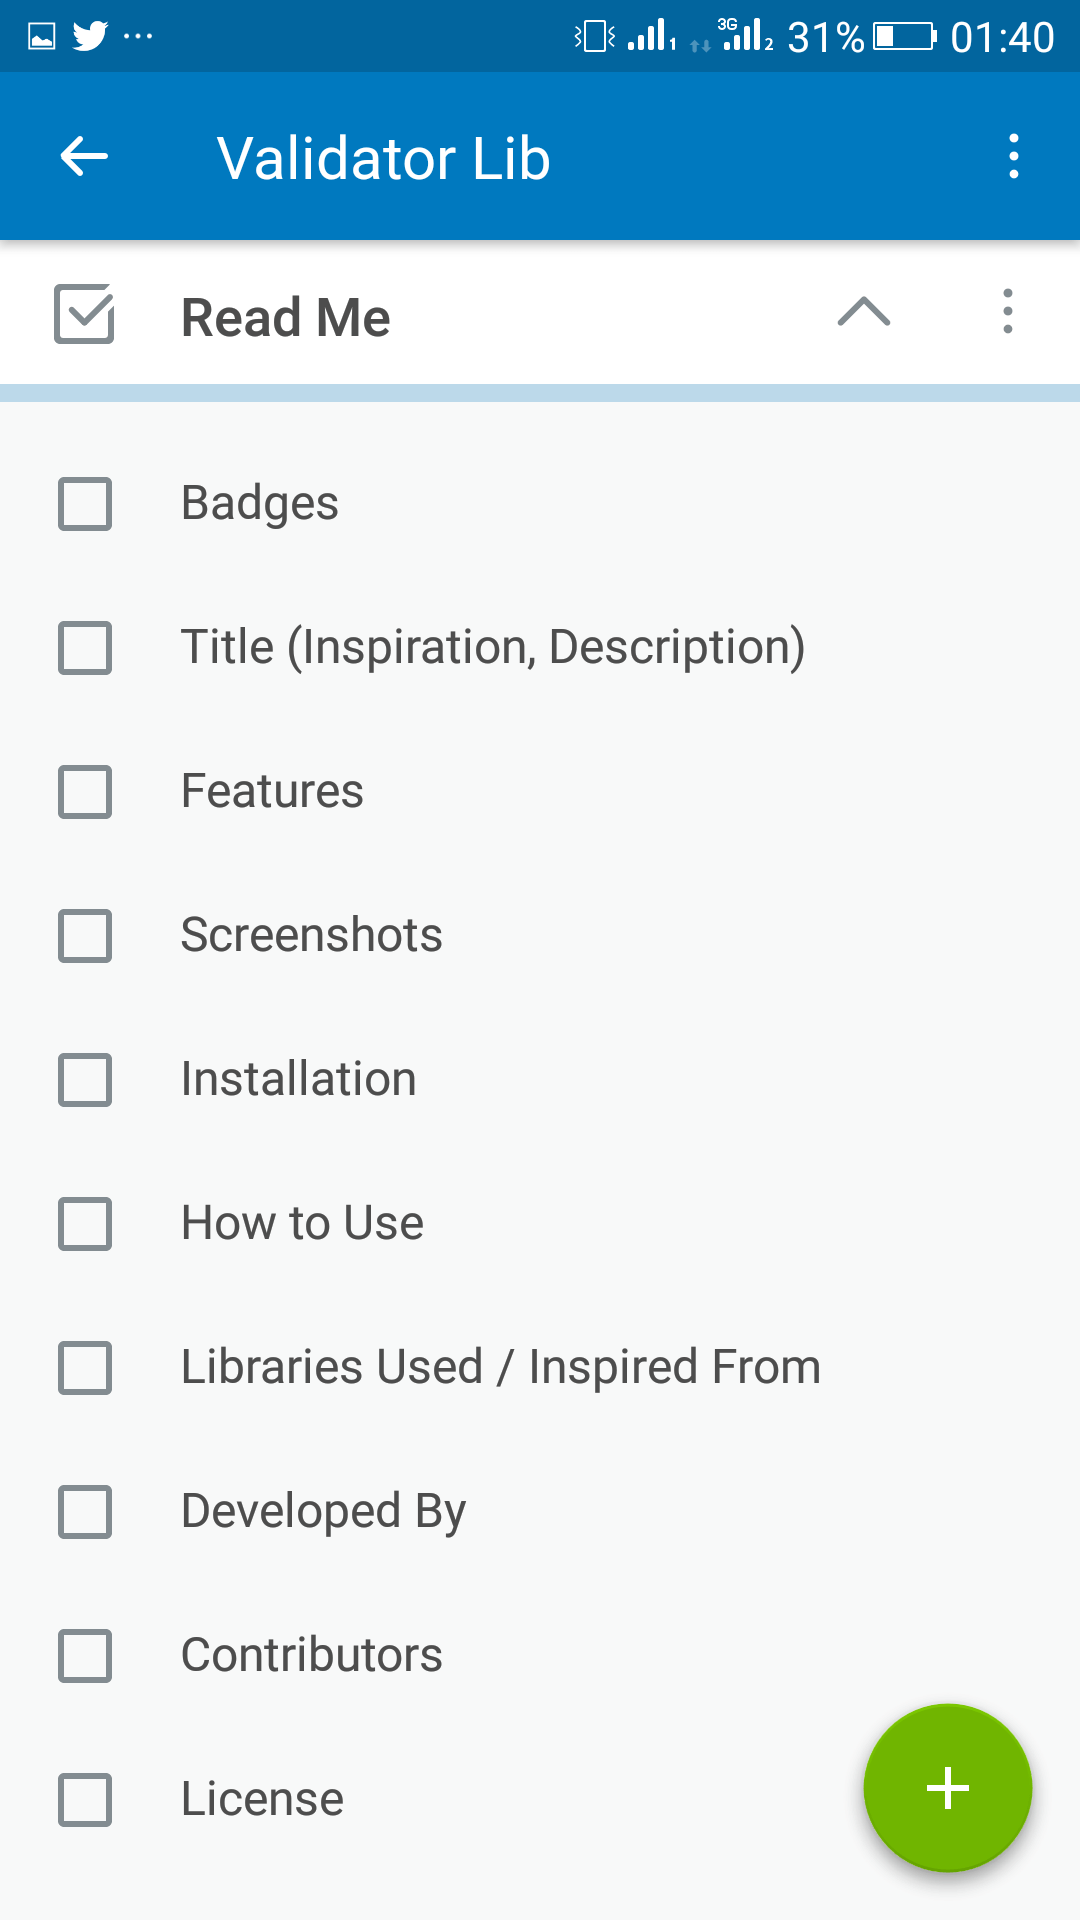 My Read Me checklist for Github Projects